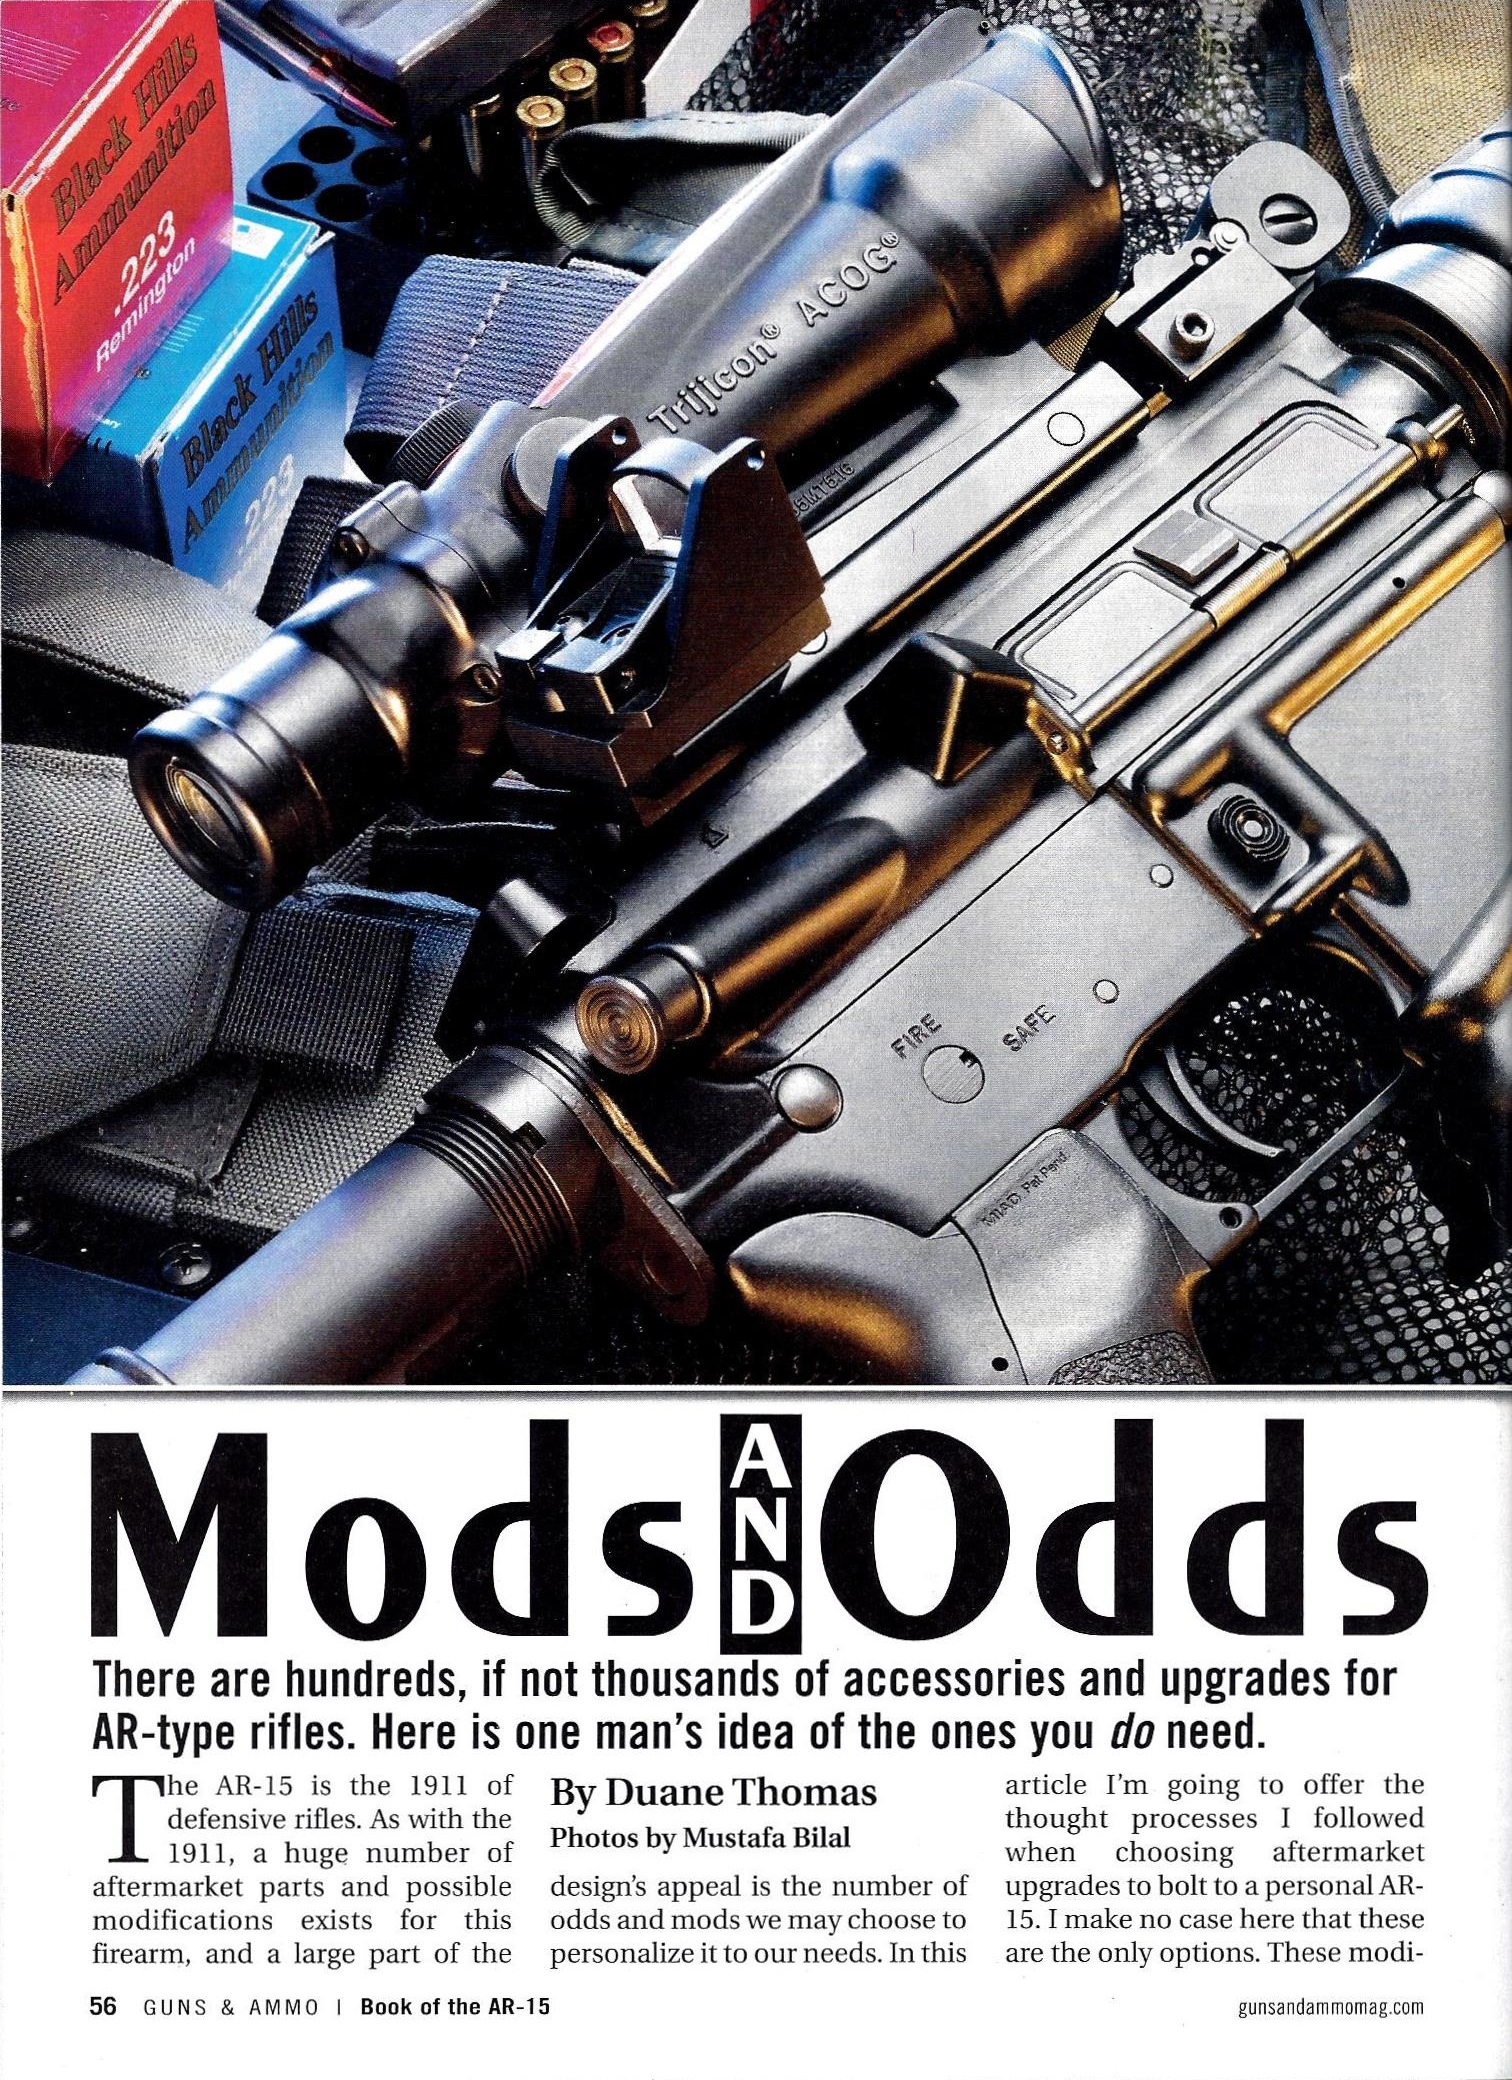 mods-and-odds-1